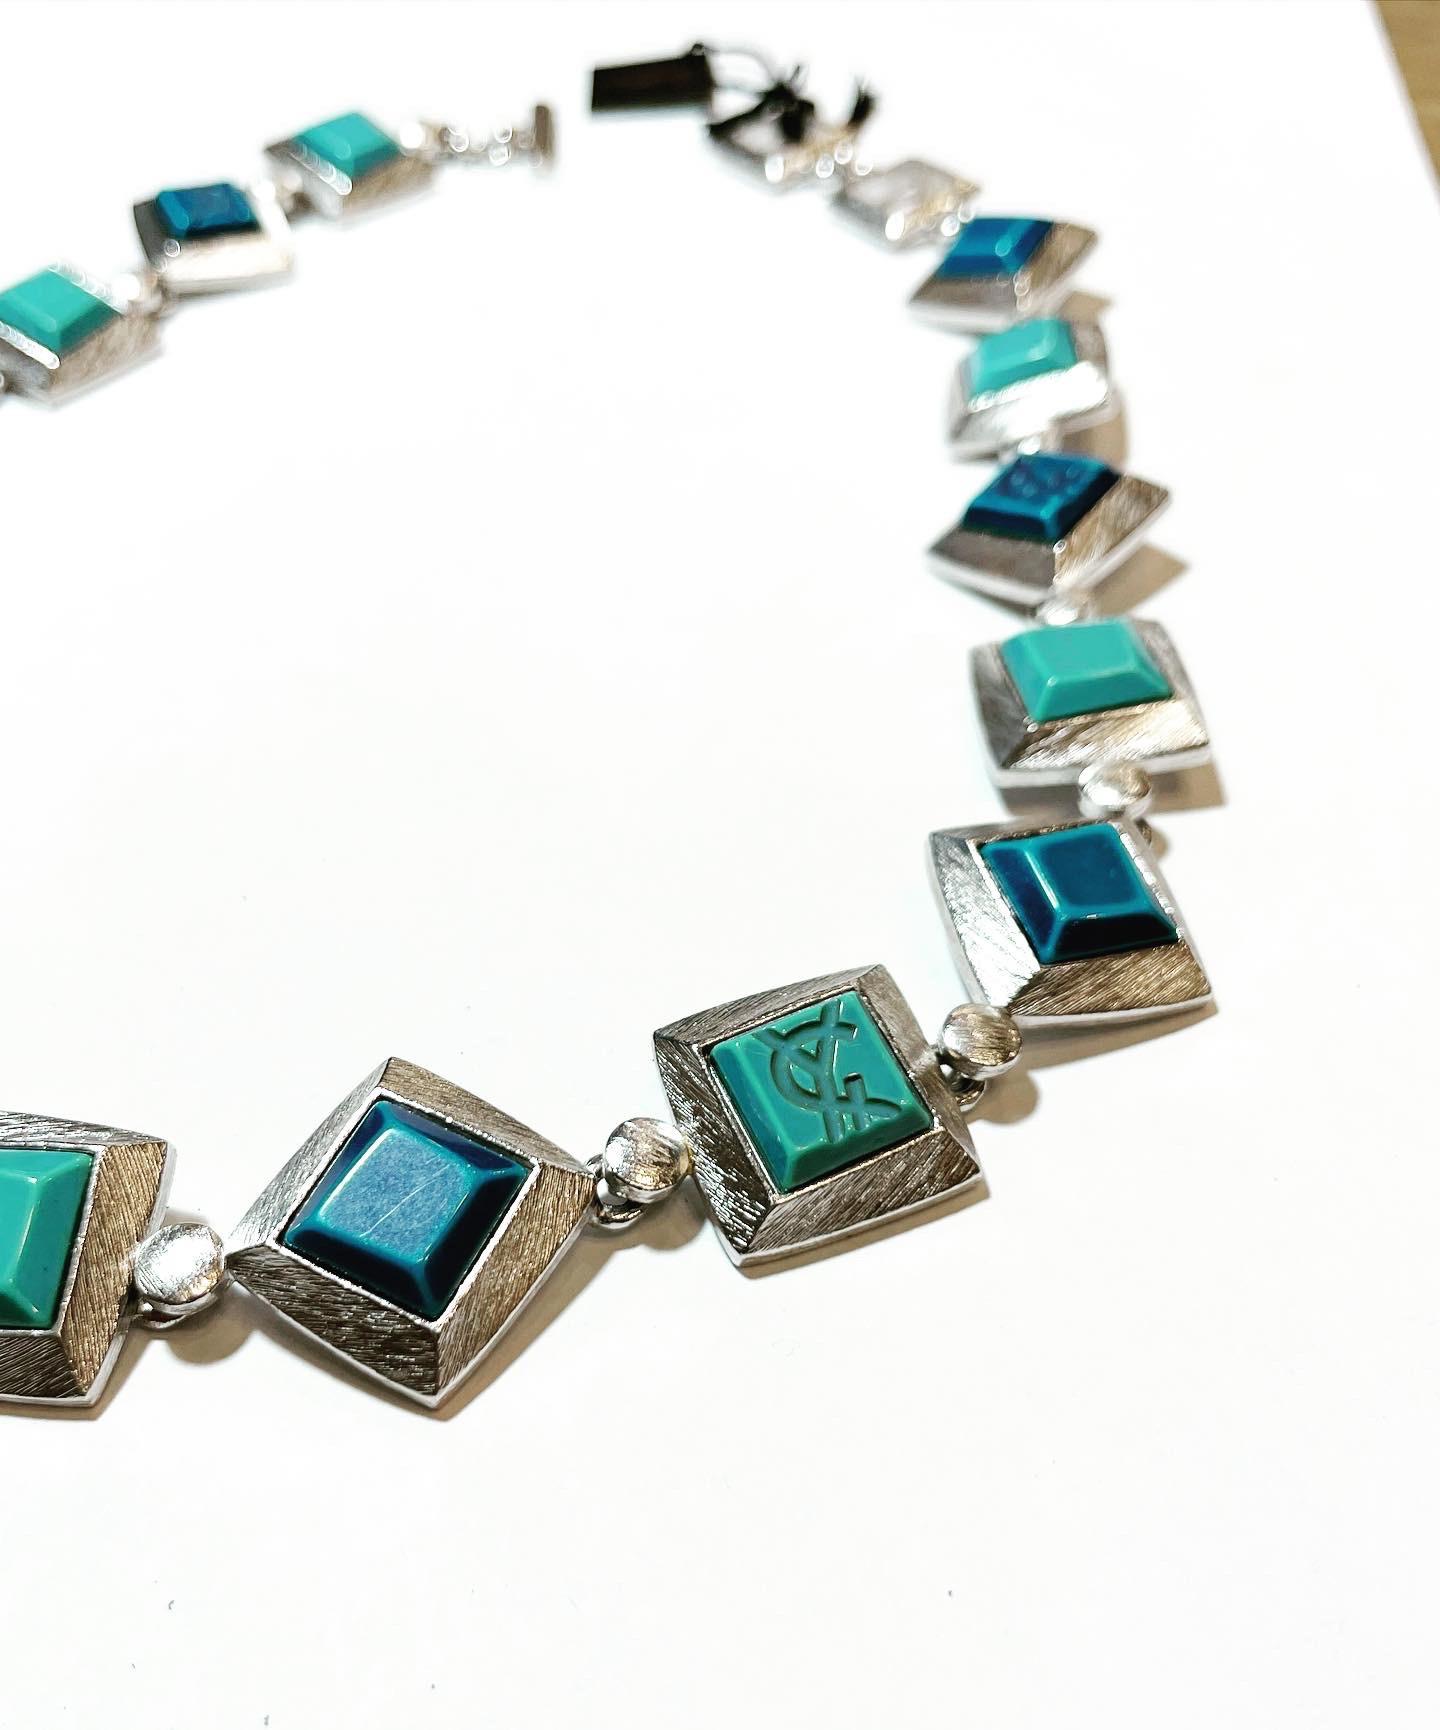 1980s gorgeous vintage YVES SAINT LAURENT  blue colour resin and Silvered square shape necklace! 
Gilt chain with the YSL logo. 
Can really add just that little extra elegance to any outfit! 
Great with jeans, and perfect with a dress.
You can wear